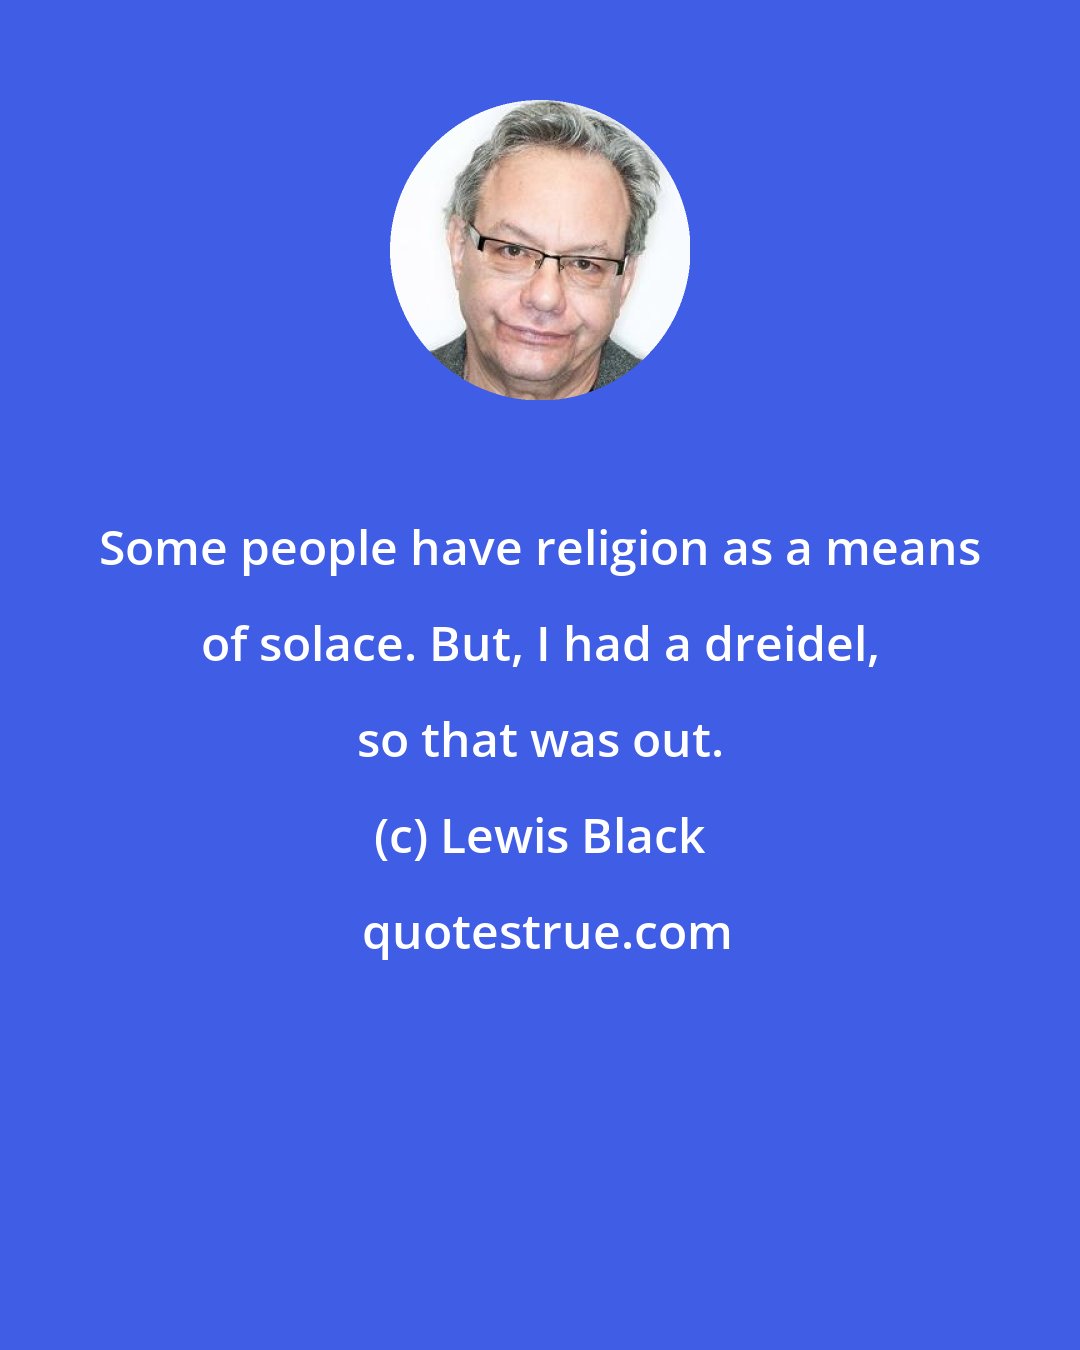 Lewis Black: Some people have religion as a means of solace. But, I had a dreidel, so that was out.